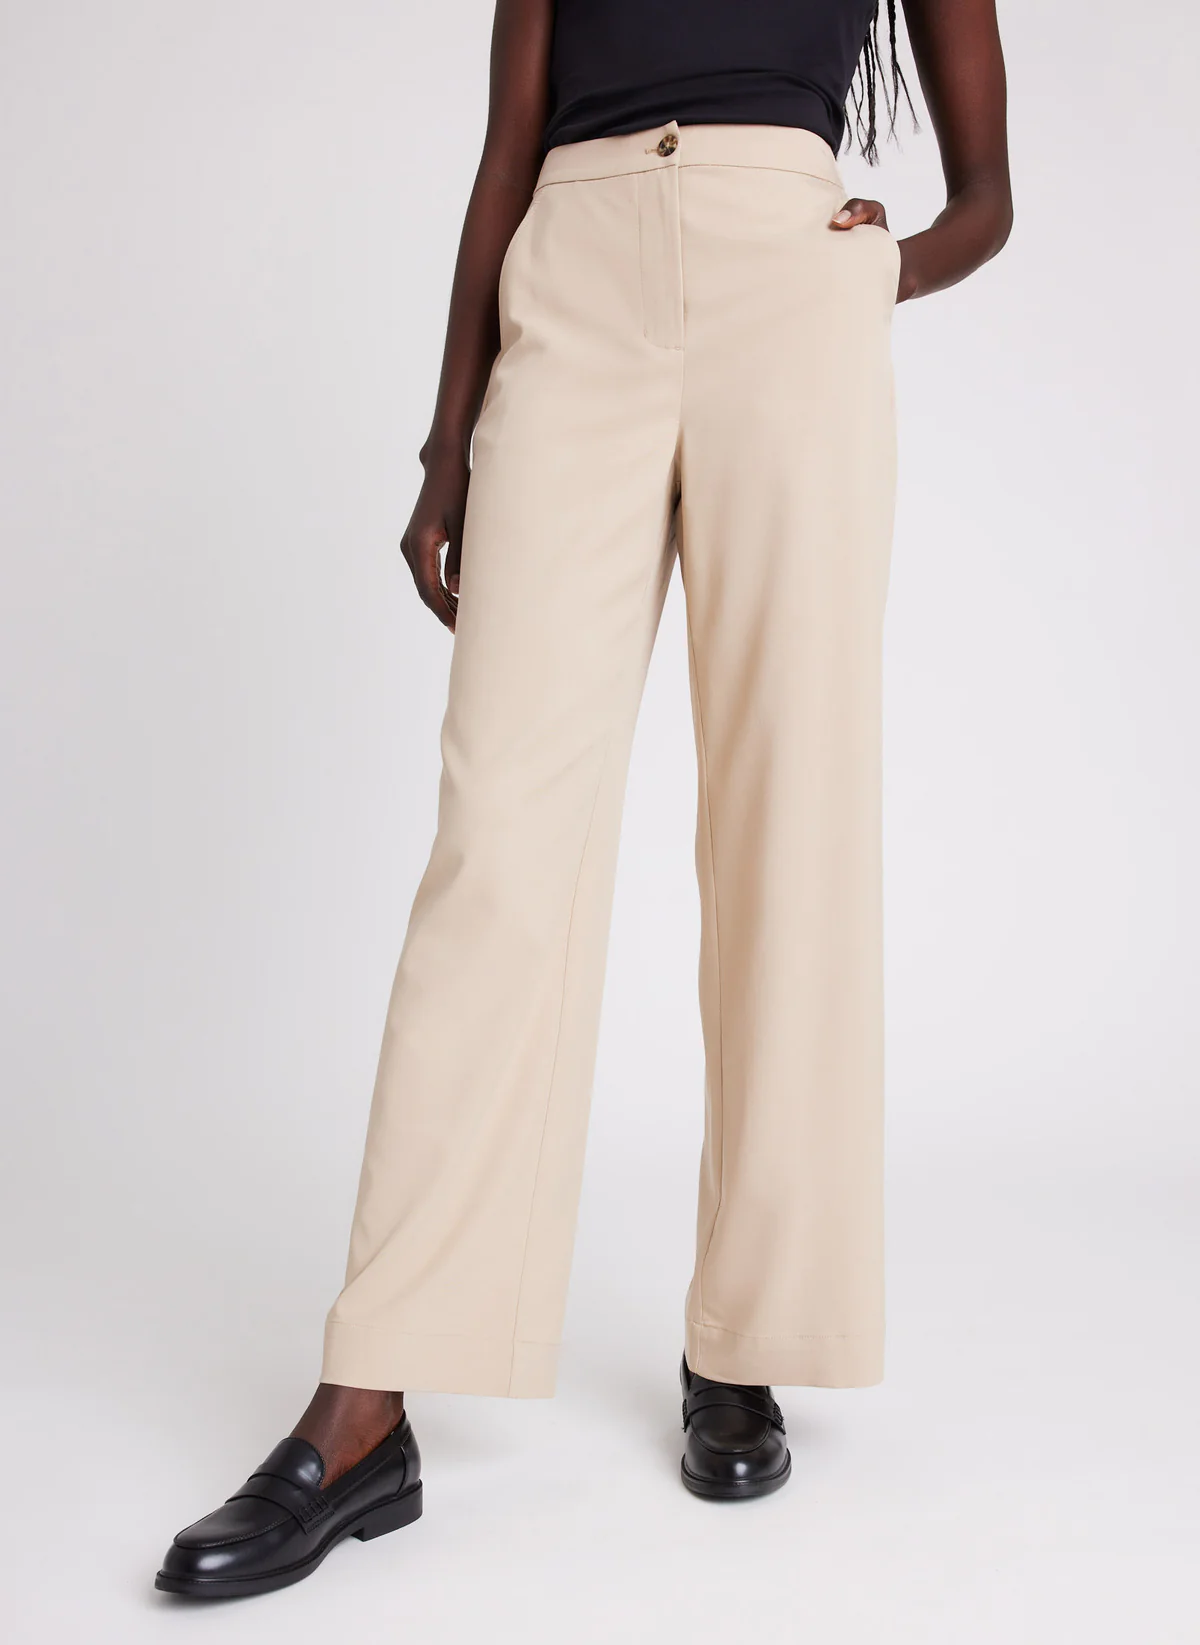 Kit and Ace + Sublime Wide Leg Trousers